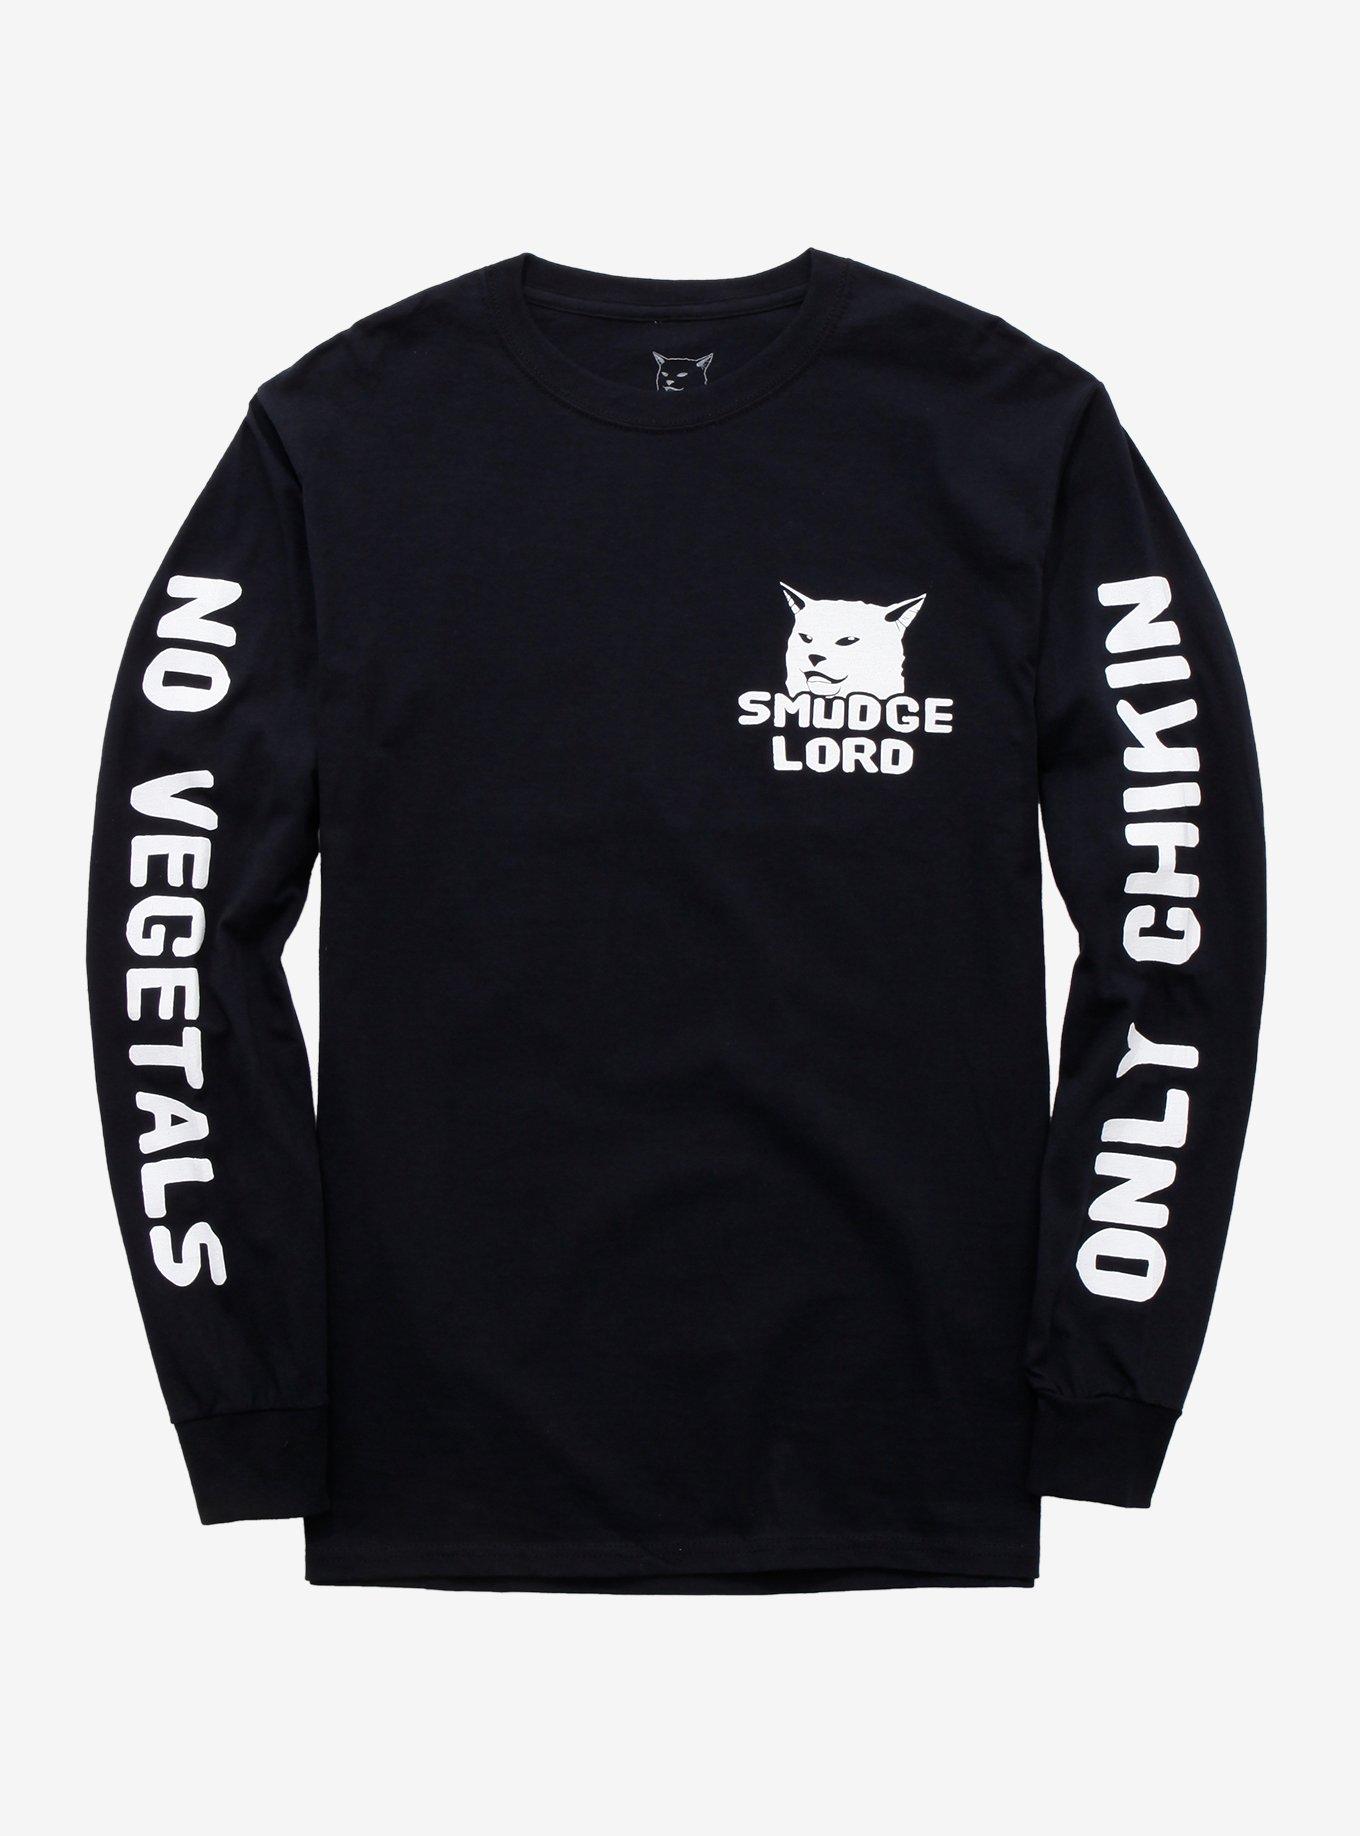 Smudgelord No Vegetals Long-Sleeve T-Shirt, WHITE, hi-res